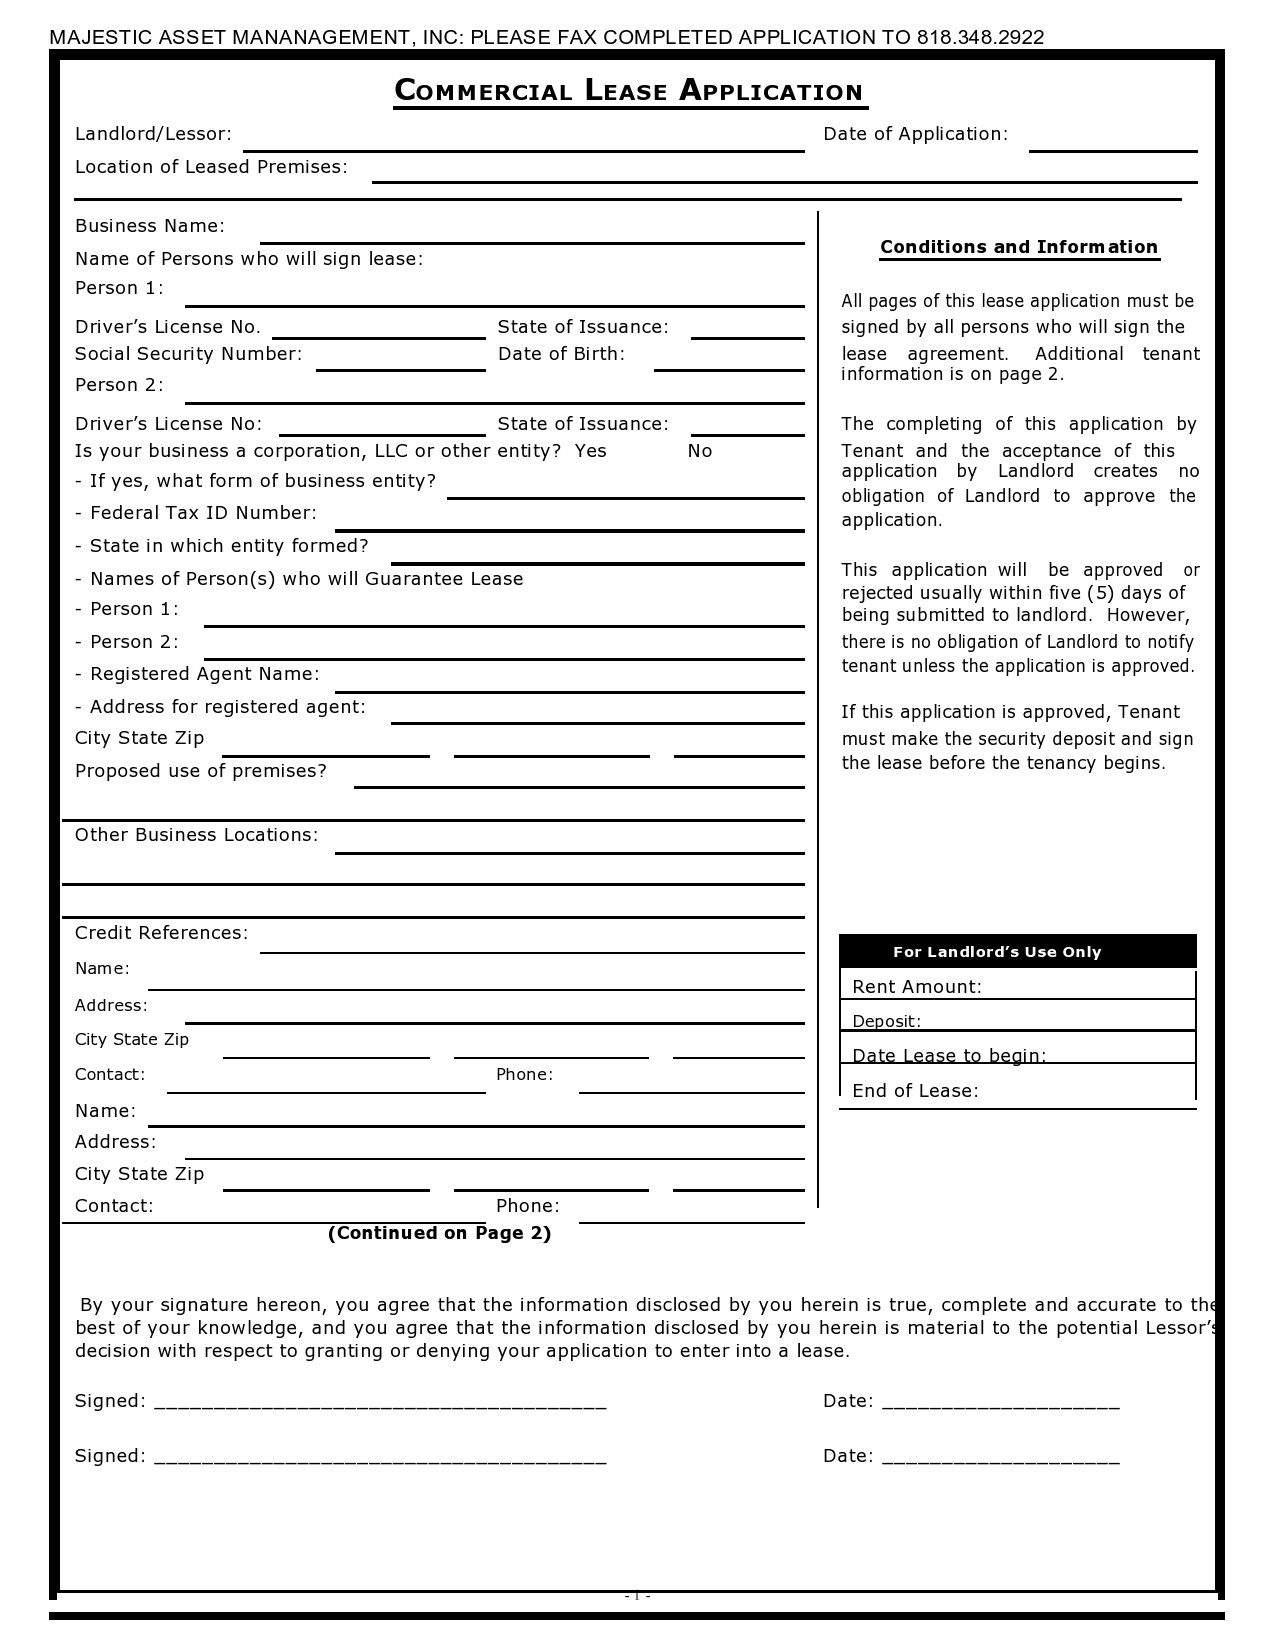 Free commercial lease application 15